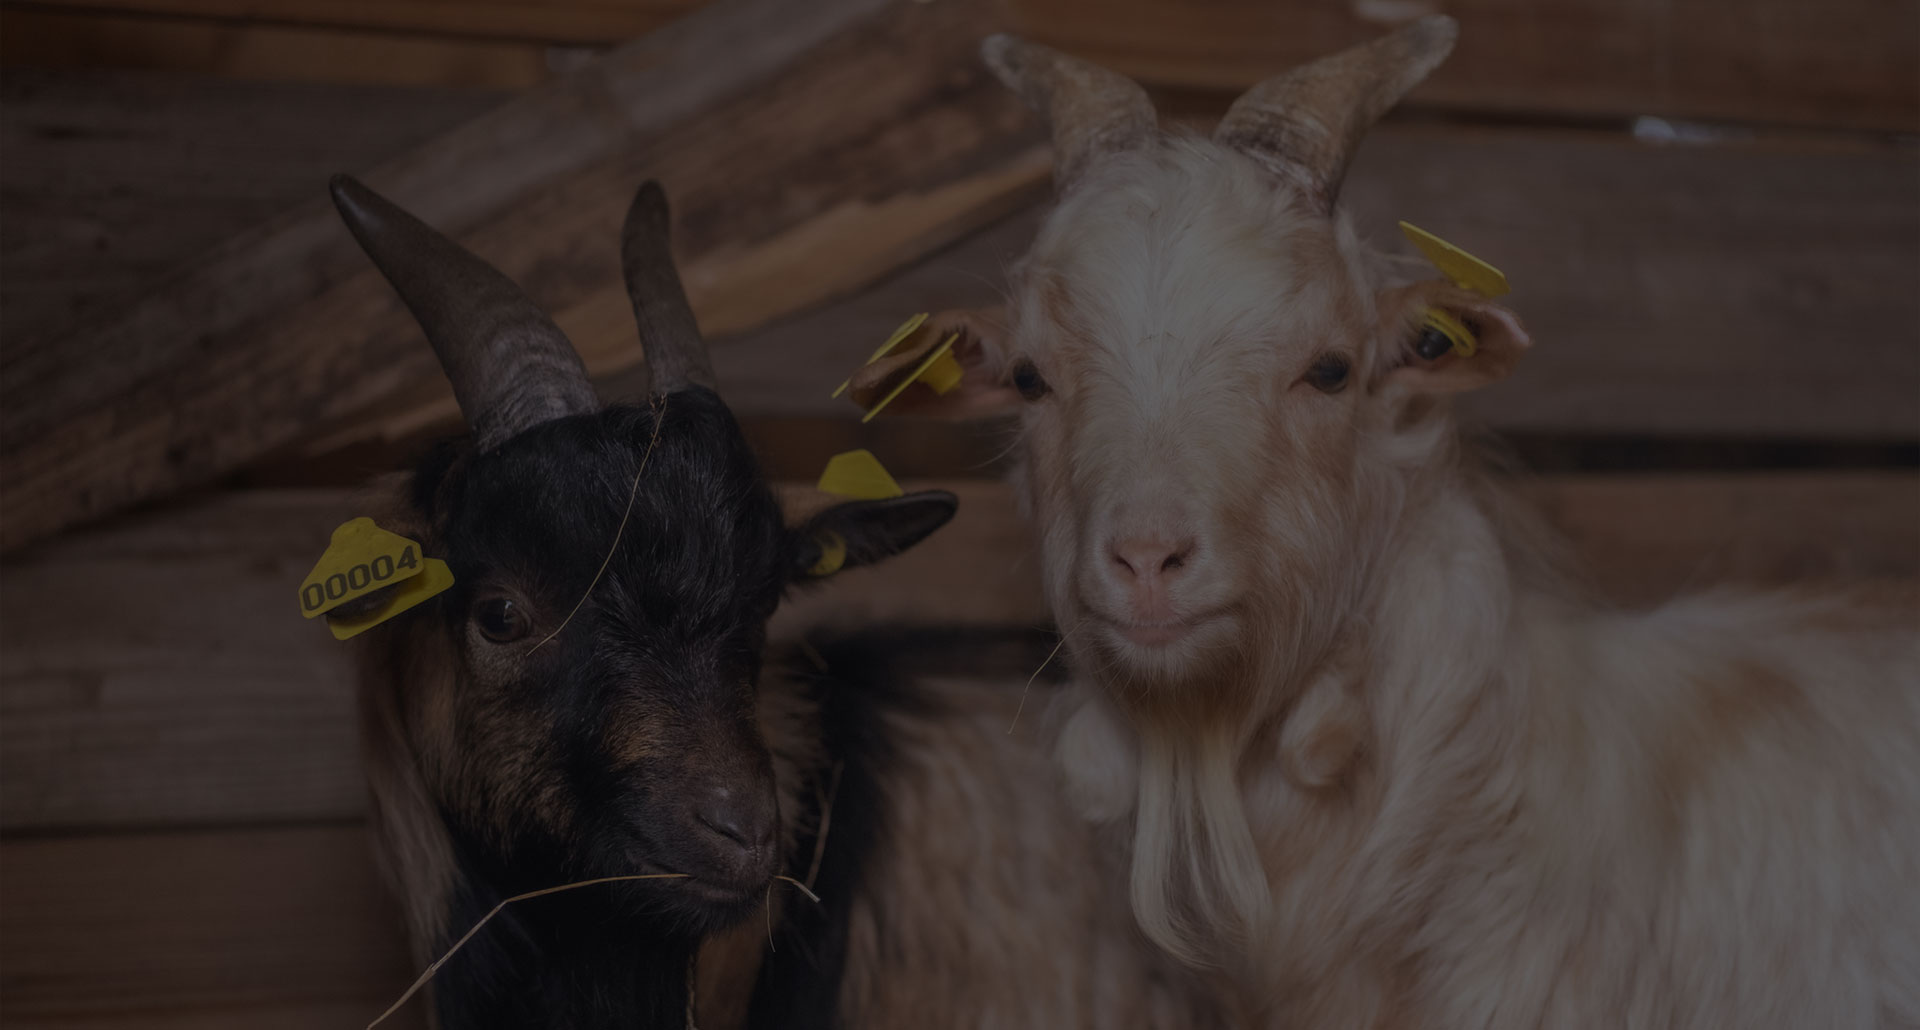 January 2022: The rescue of You and Care, two abandoned dwarf goats